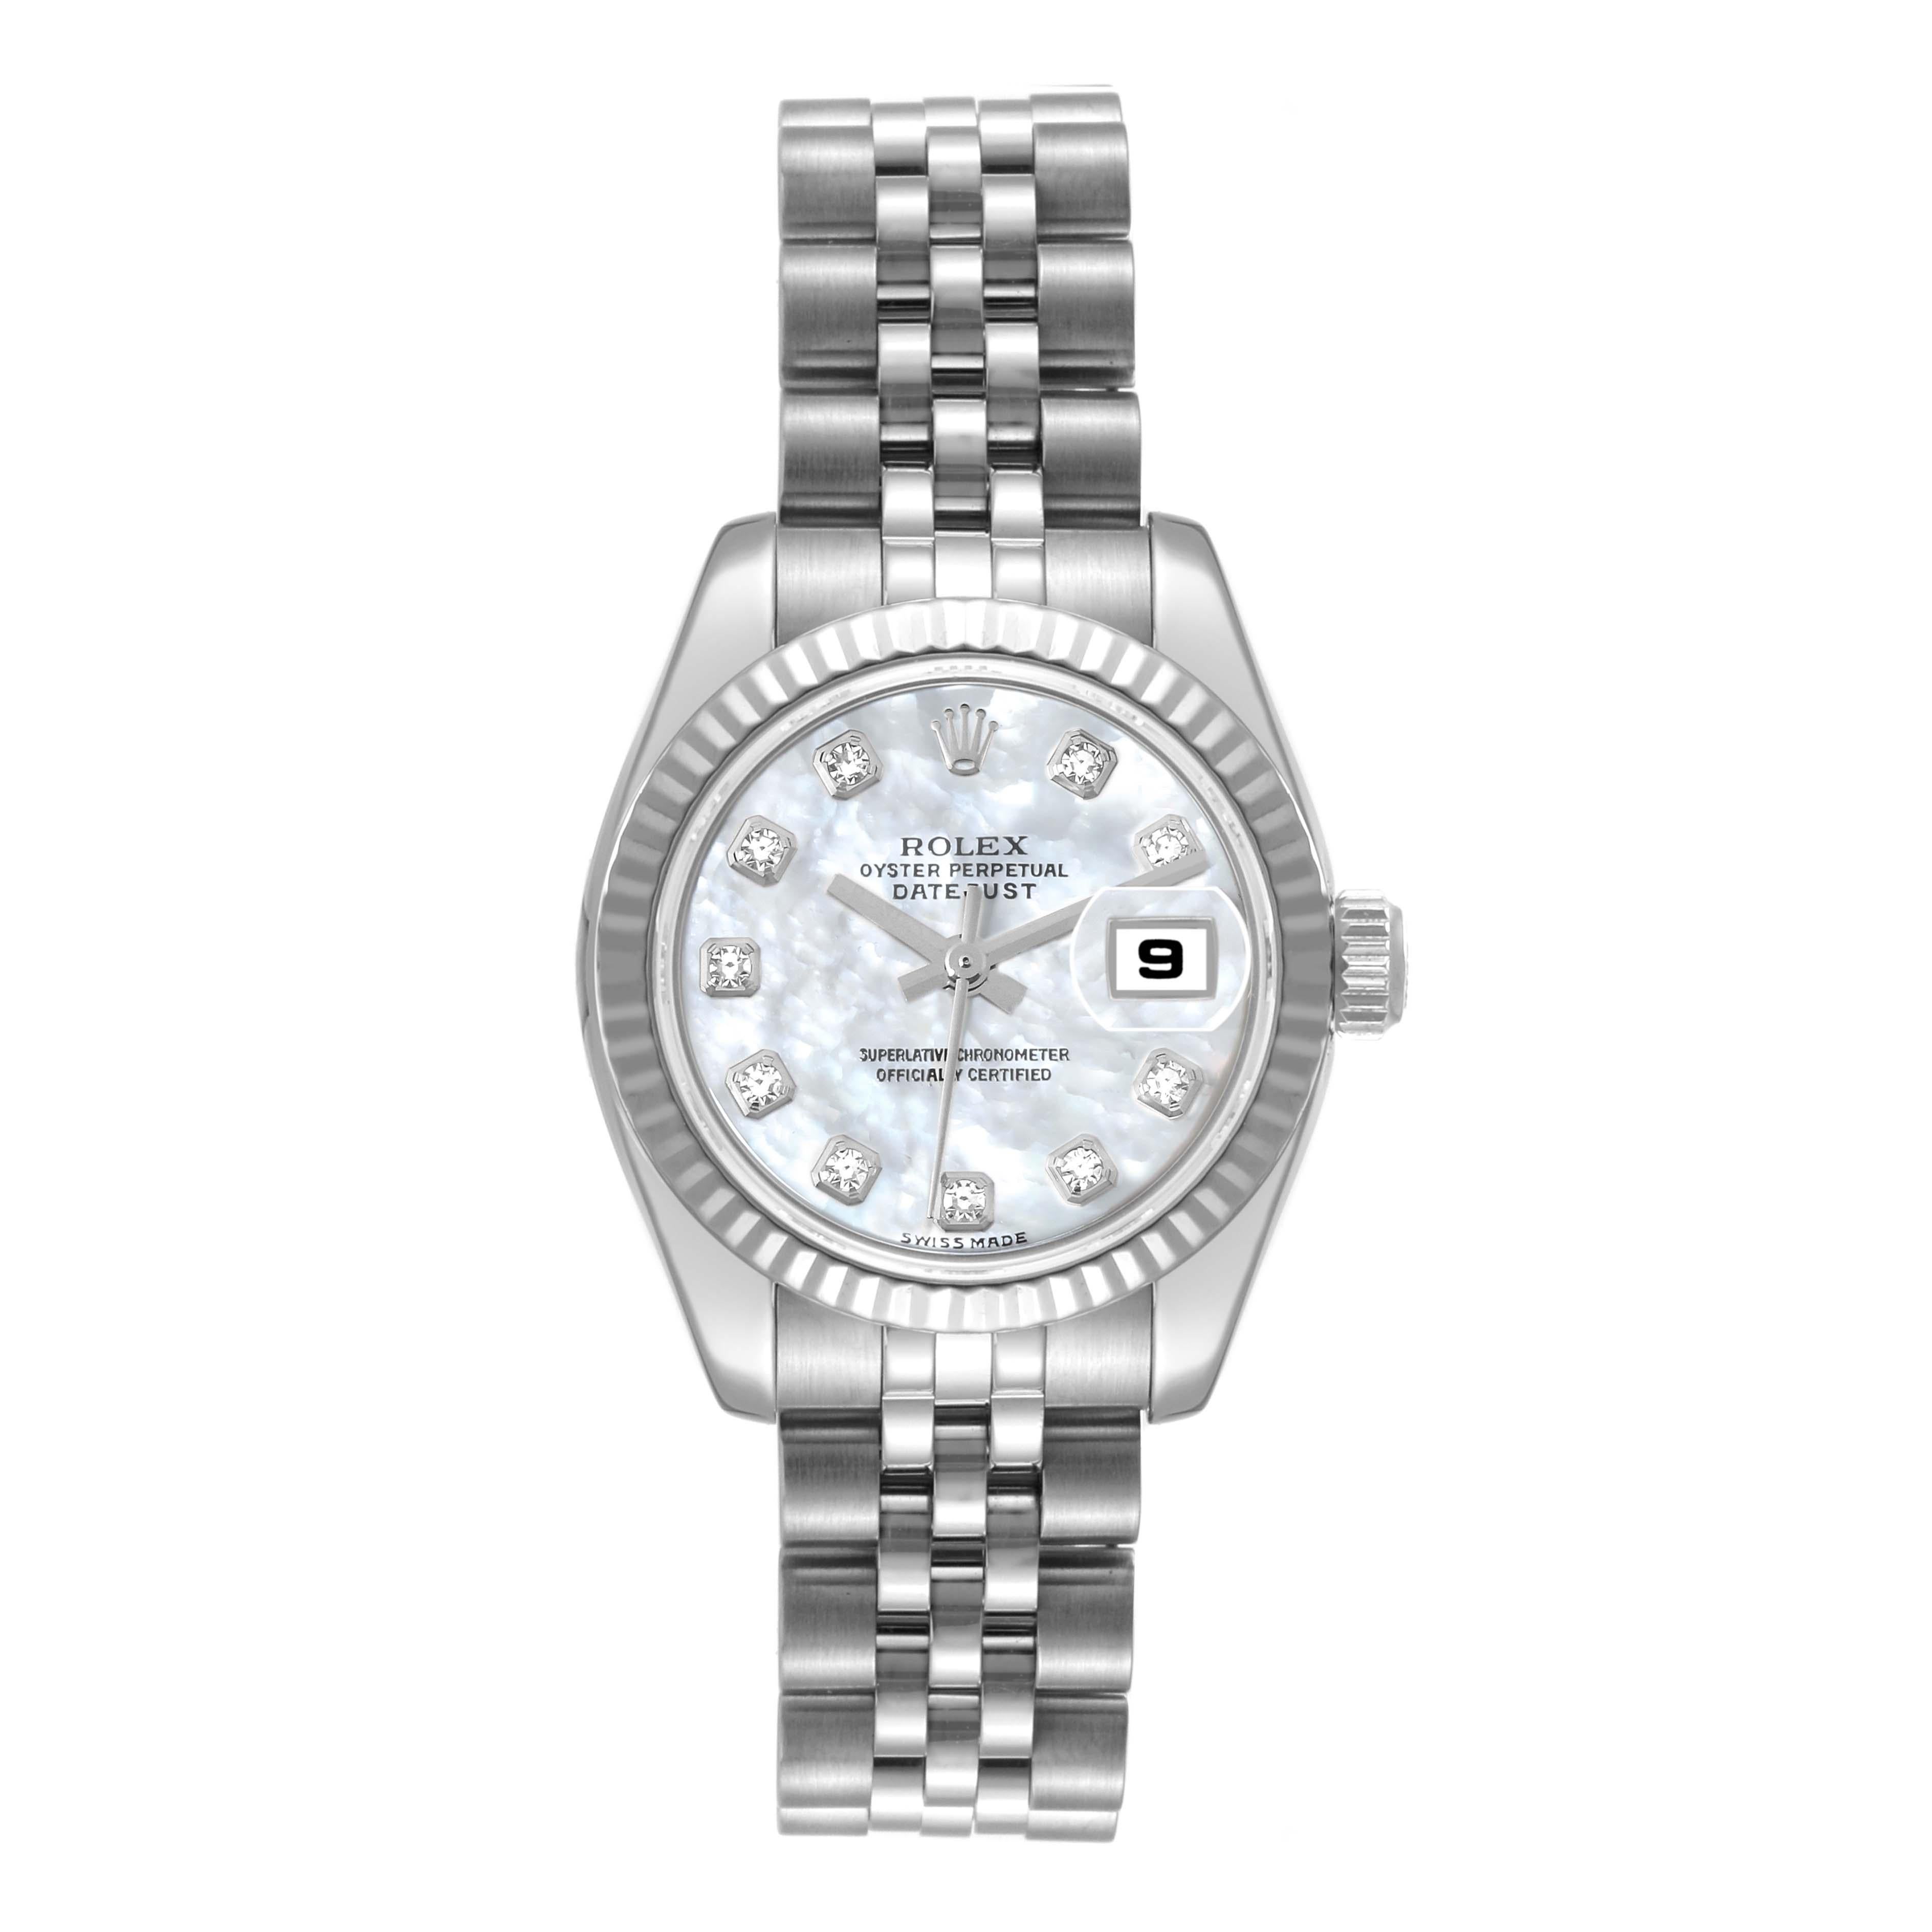 Rolex Datejust Steel White Gold MOP Diamond Dial Ladies Watch 179174. Officially certified chronometer automatic self-winding movement. Stainless steel oyster case 26.0 mm in diameter. Rolex logo on the crown. 18K white gold fluted bezel. Scratch